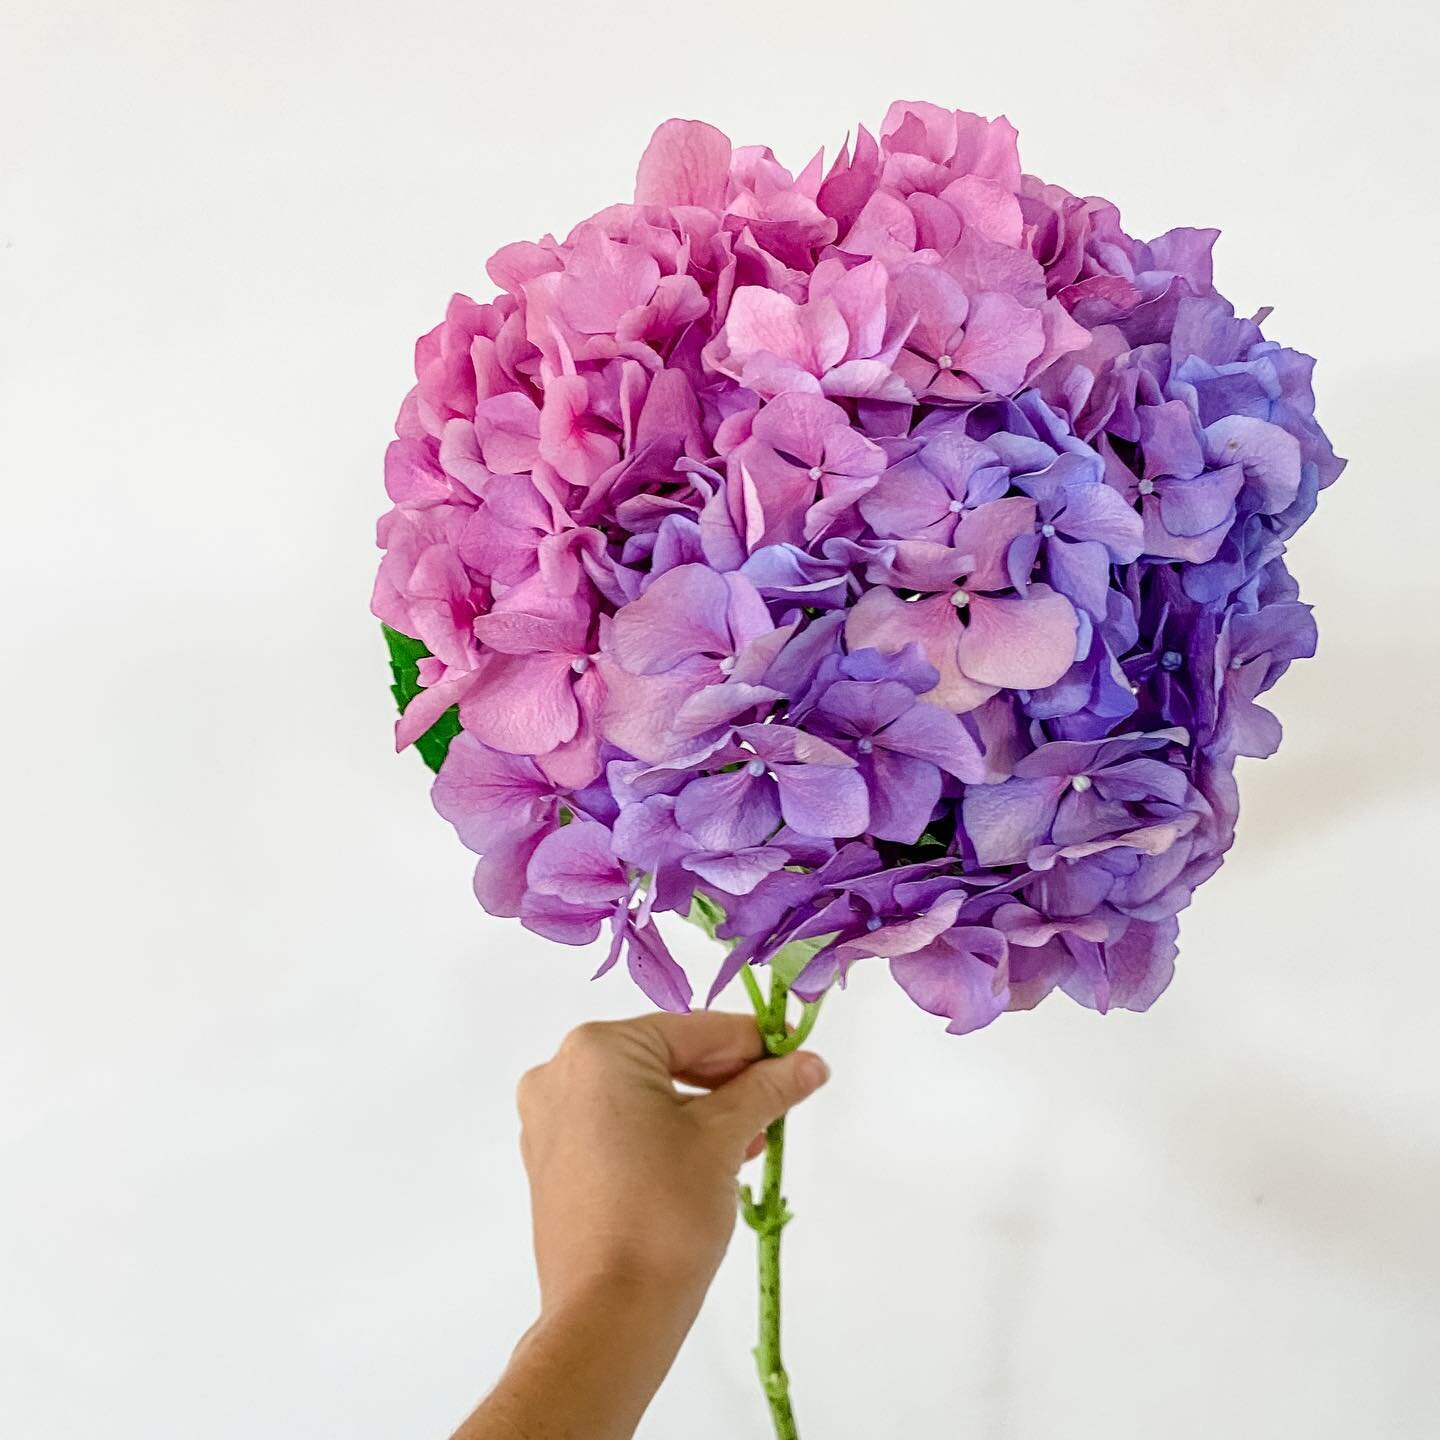 How incredible is the colour of this hydrangea stem! 

Getting excited for this weekend&rsquo;s wedding and it&rsquo;s incredible colour palette!